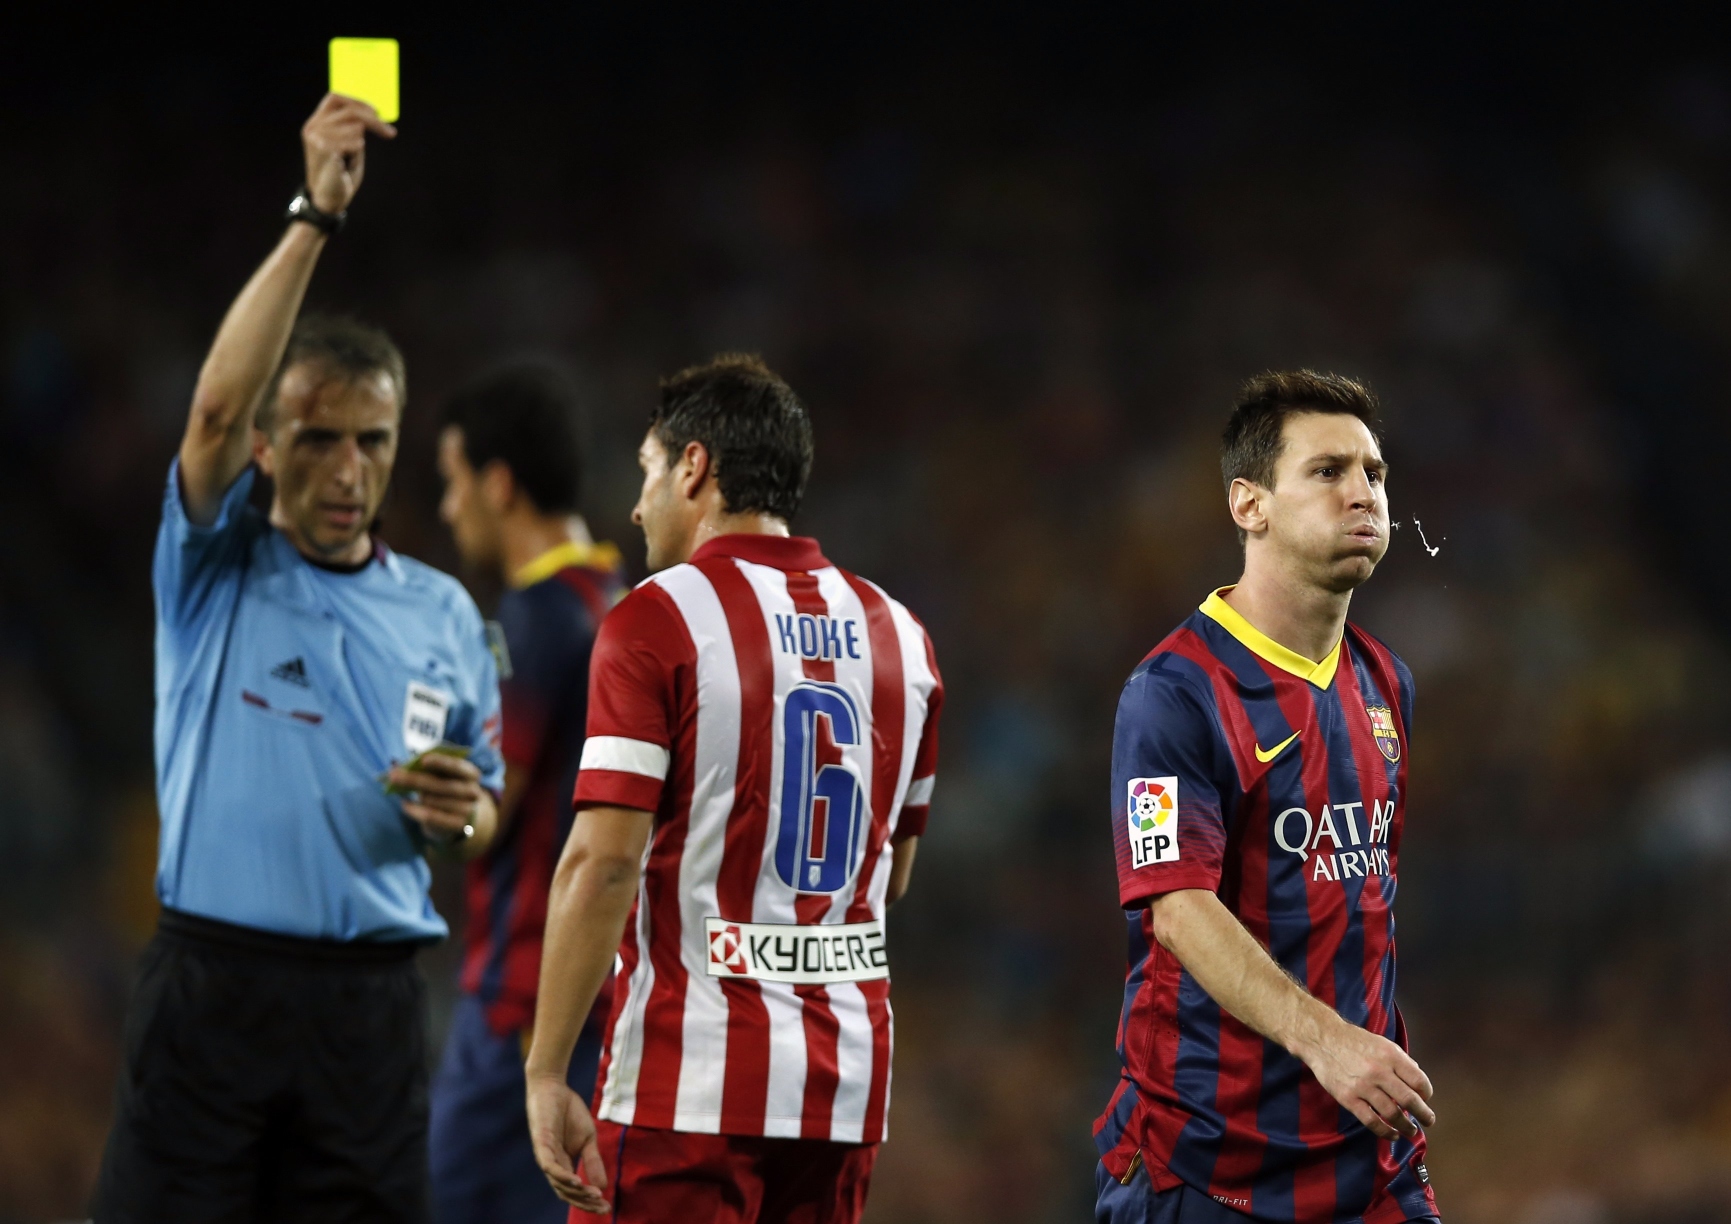 Referee Fernandez Borbalan gives a yellow card to Atletico Madrid's Koke (C) as Barcelona's Lionel Messi (R) walks away during their Spanish Super Cup second leg soccer match at Camp Nou stadium in Barcelona. Photo: Reuters